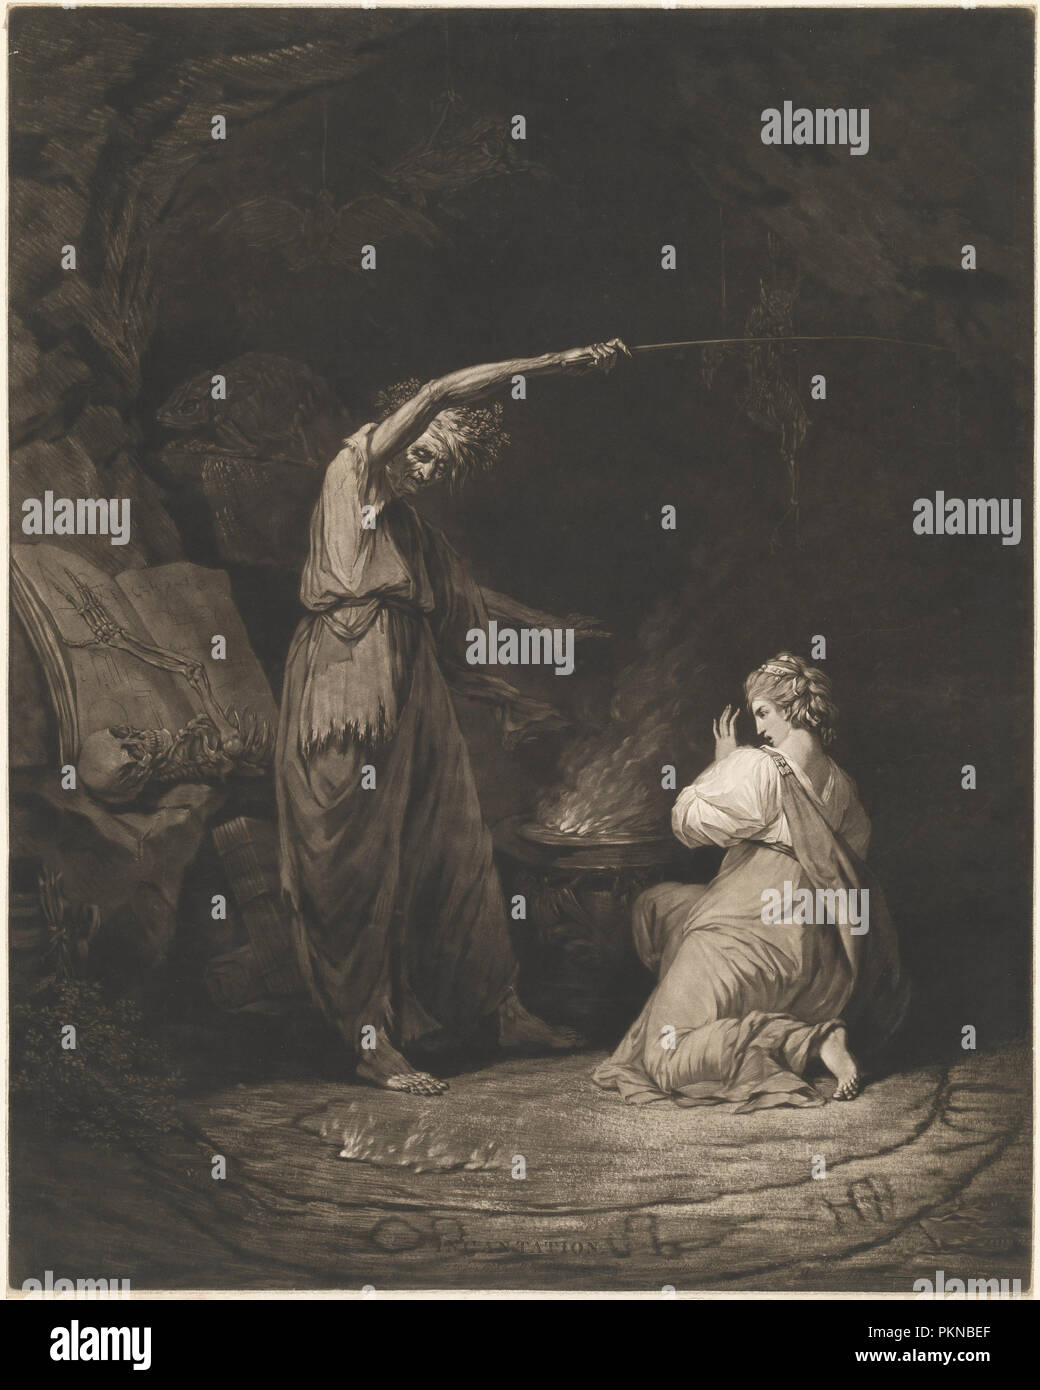 Incantation. Dated: 1773. Dimensions: plate: 61 x 48.6 cm (24 x 19 1/8 in.)  sheet: 61.4 x 48.9 cm (24 3/16 x 19 1/4 in.)  overall (mat size): 86.4 x 66 cm (34 x 26 in.). Medium: mezzotint on laid paper. Museum: National Gallery of Art, Washington DC. Author: John Dixon after John Hamilton Mortimer. Stock Photo